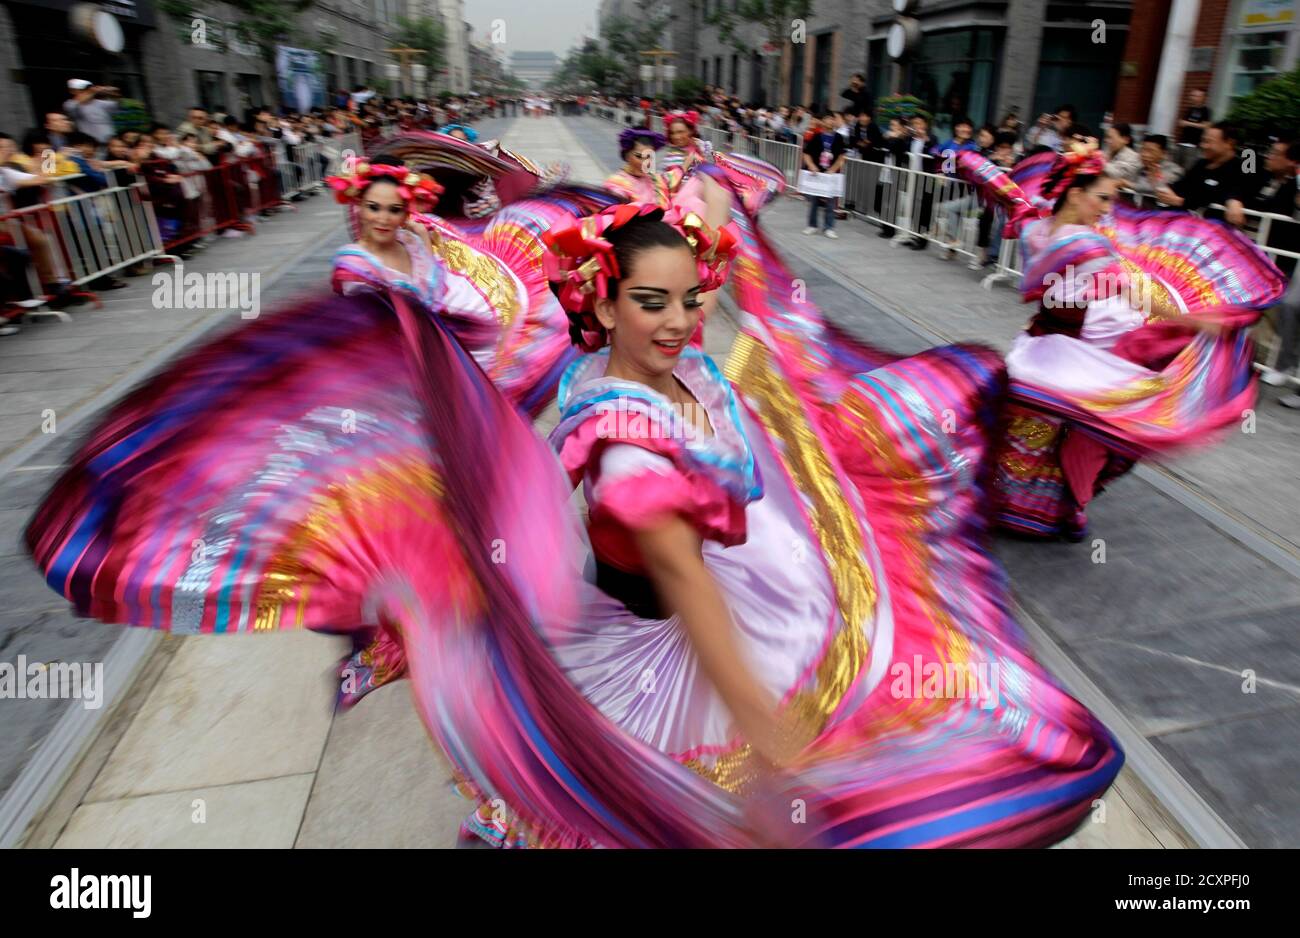 Performers from Mexico dance during the opening ceremony of 12th Beijing International Tourism Festival along Qianmen Commercial Street, in Beijing, September 19, 2010. REUTERS/Jason Lee (CHINA - Tags: TRAVEL) Stock Photo